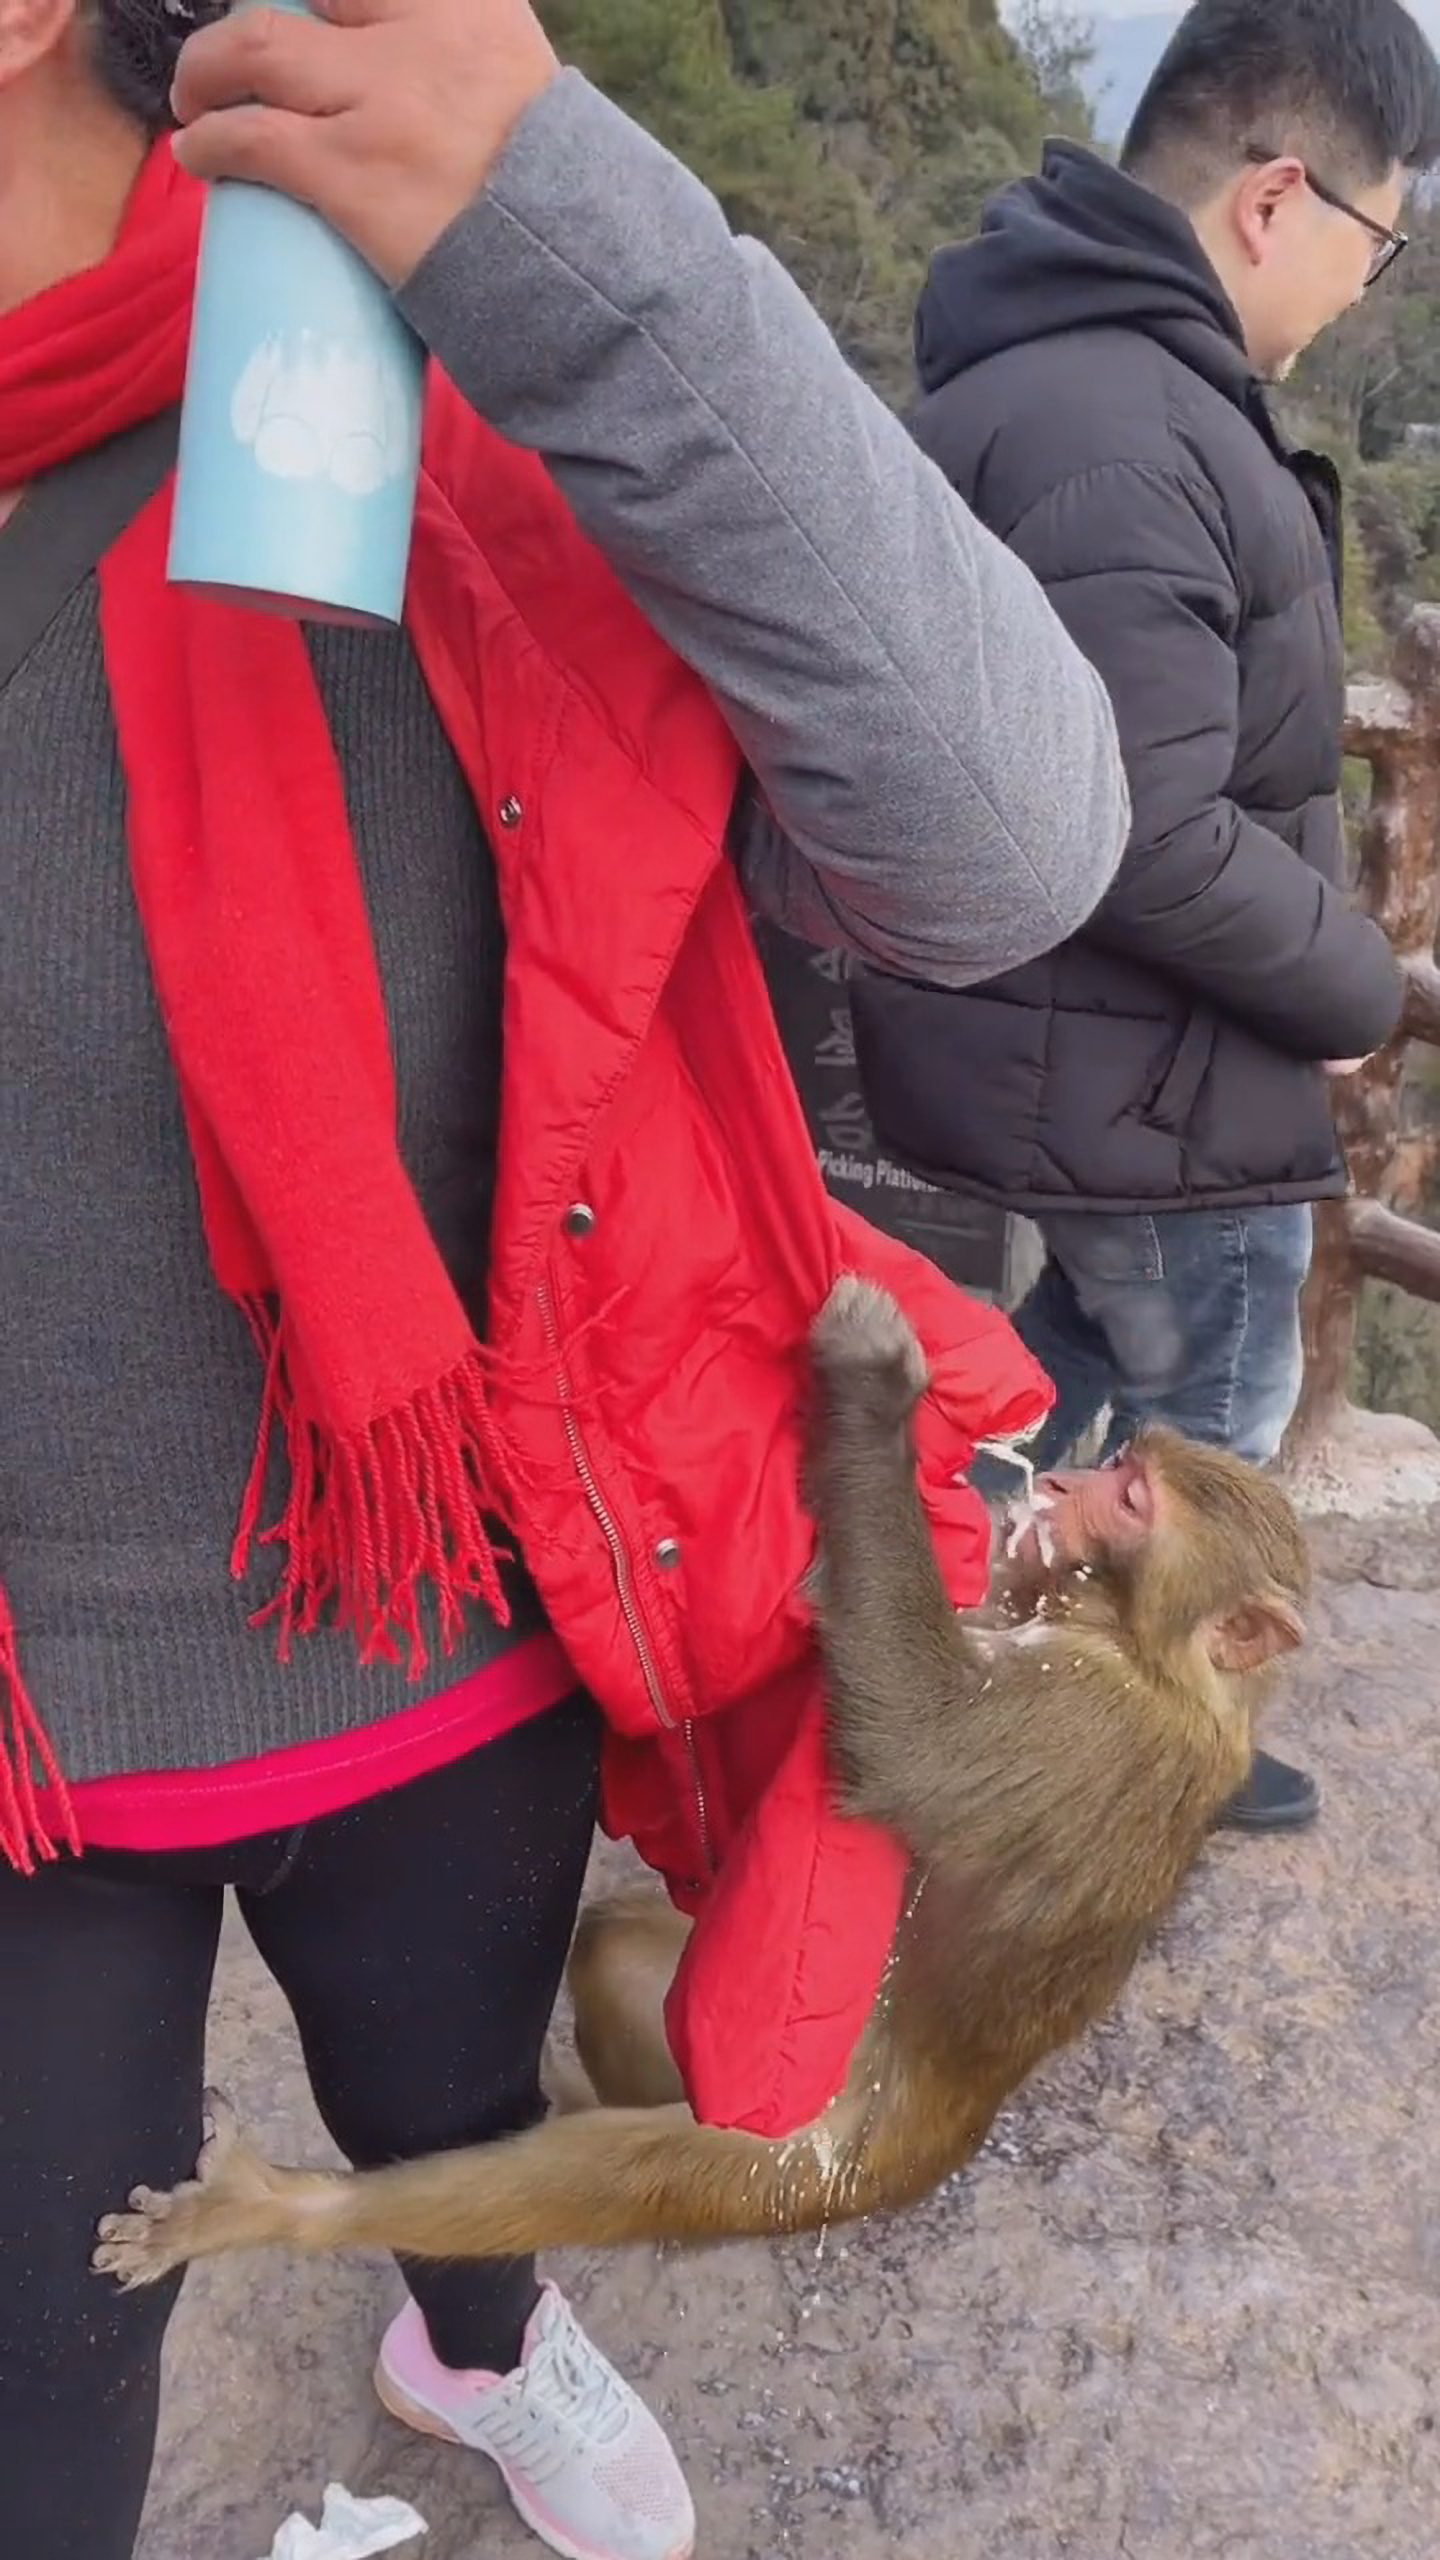 Read more about the article Cheeky Monkey Grabs Womans Leg And Drinks From Carton In Her Pocket